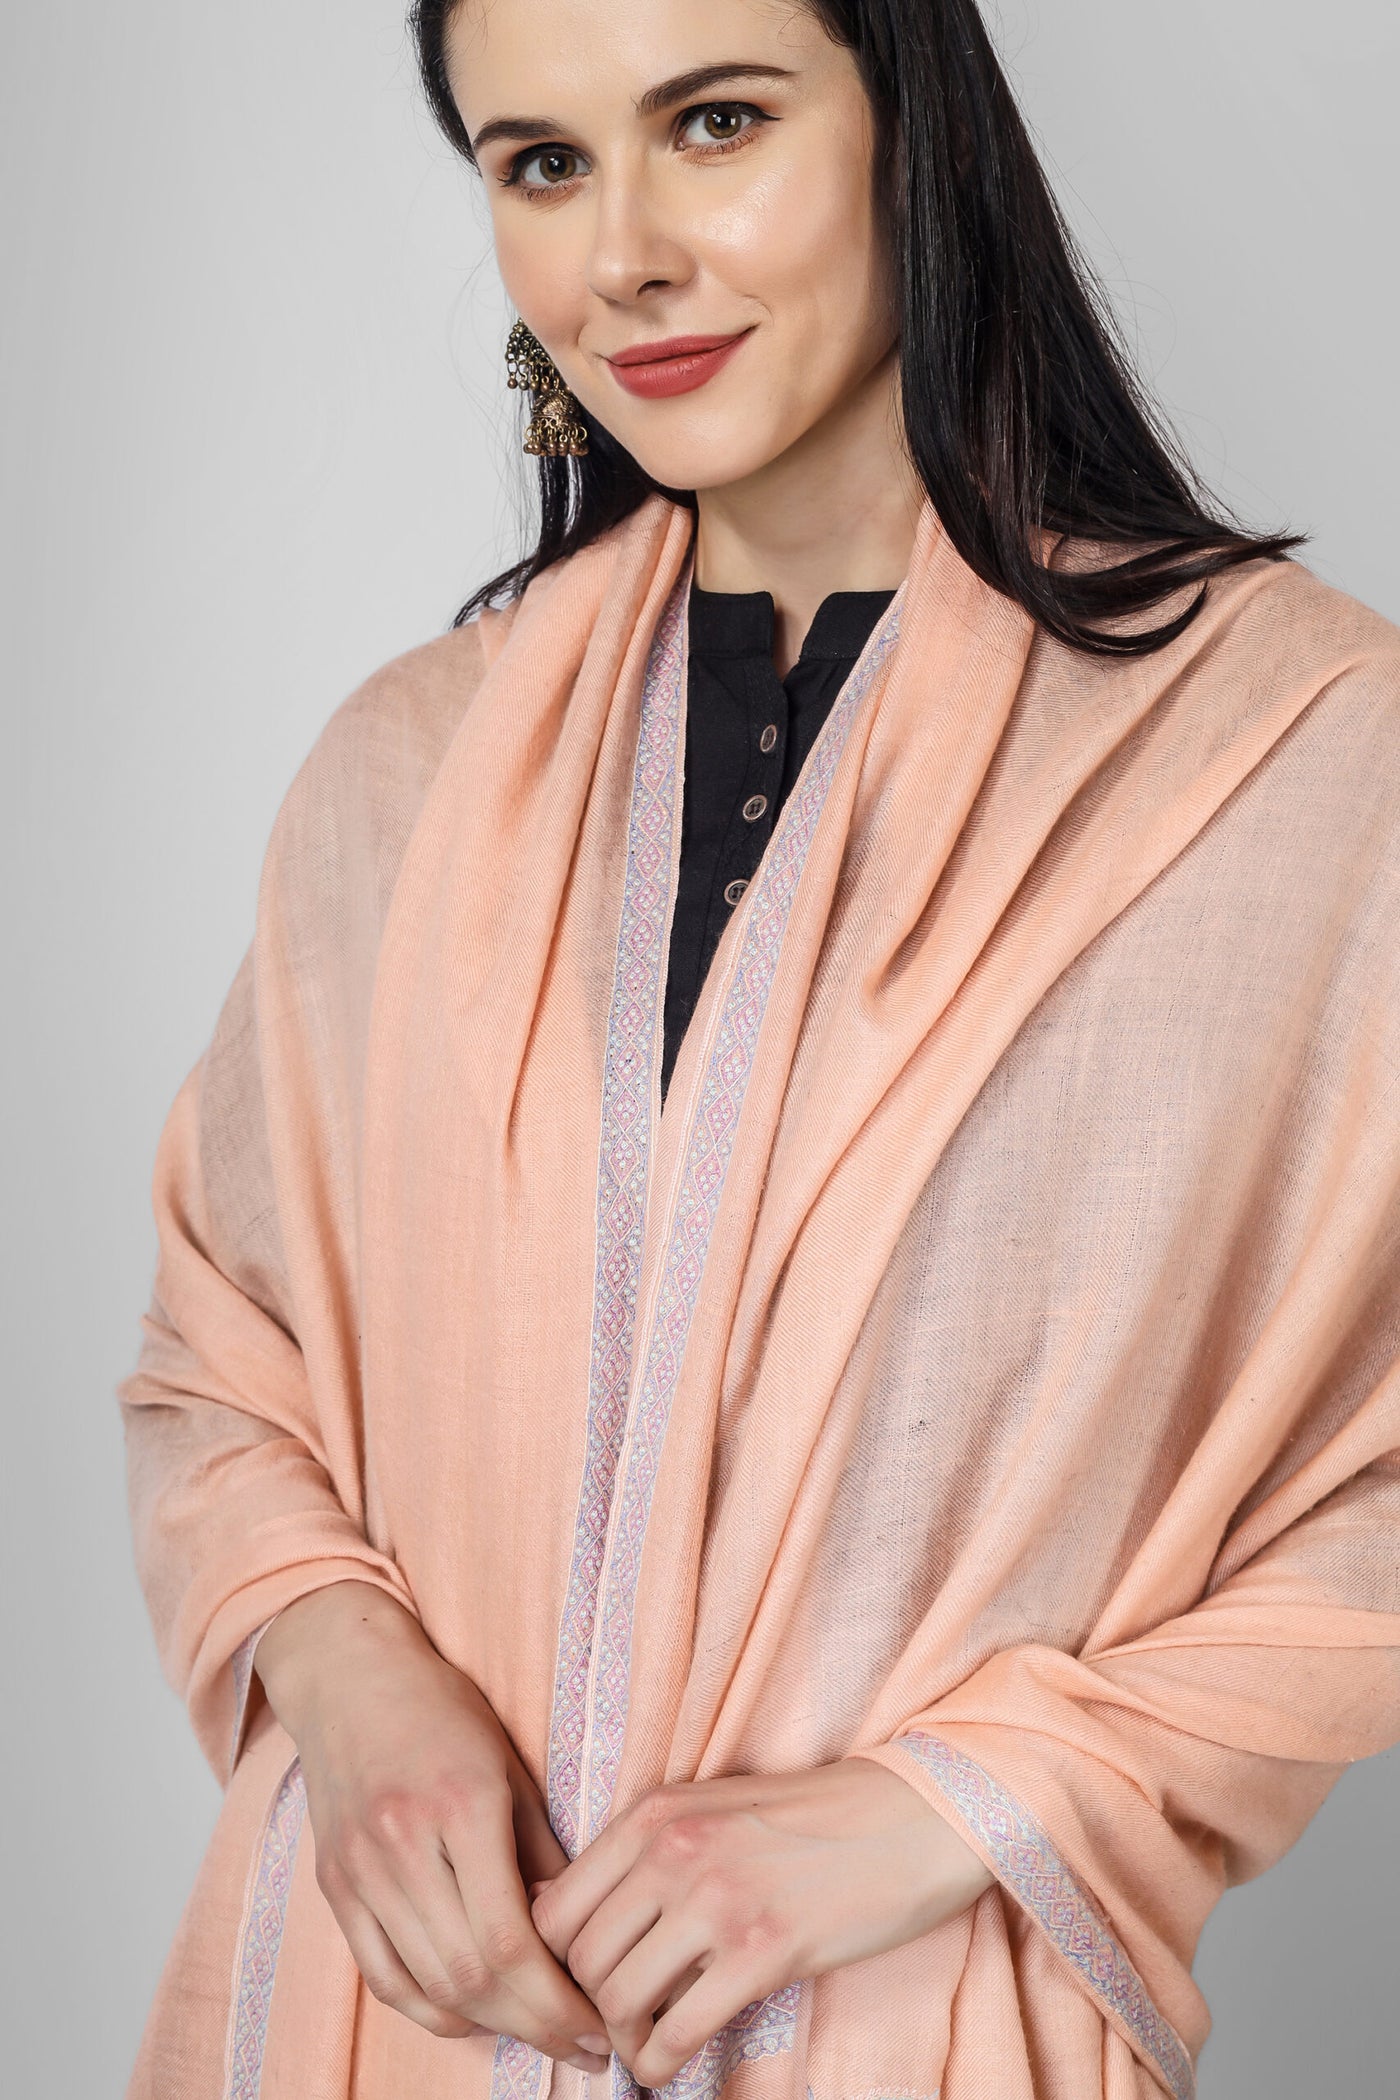 This peach pashmina mehnoor hashidaar is elegant and very different design In addition to their beautiful designs, our pashmina shawls are also versatile fashion accessories. They can be worn in a variety of ways, from draped over the shoulders to wrapped around the neck like a scarf. they are so warm and comfortable